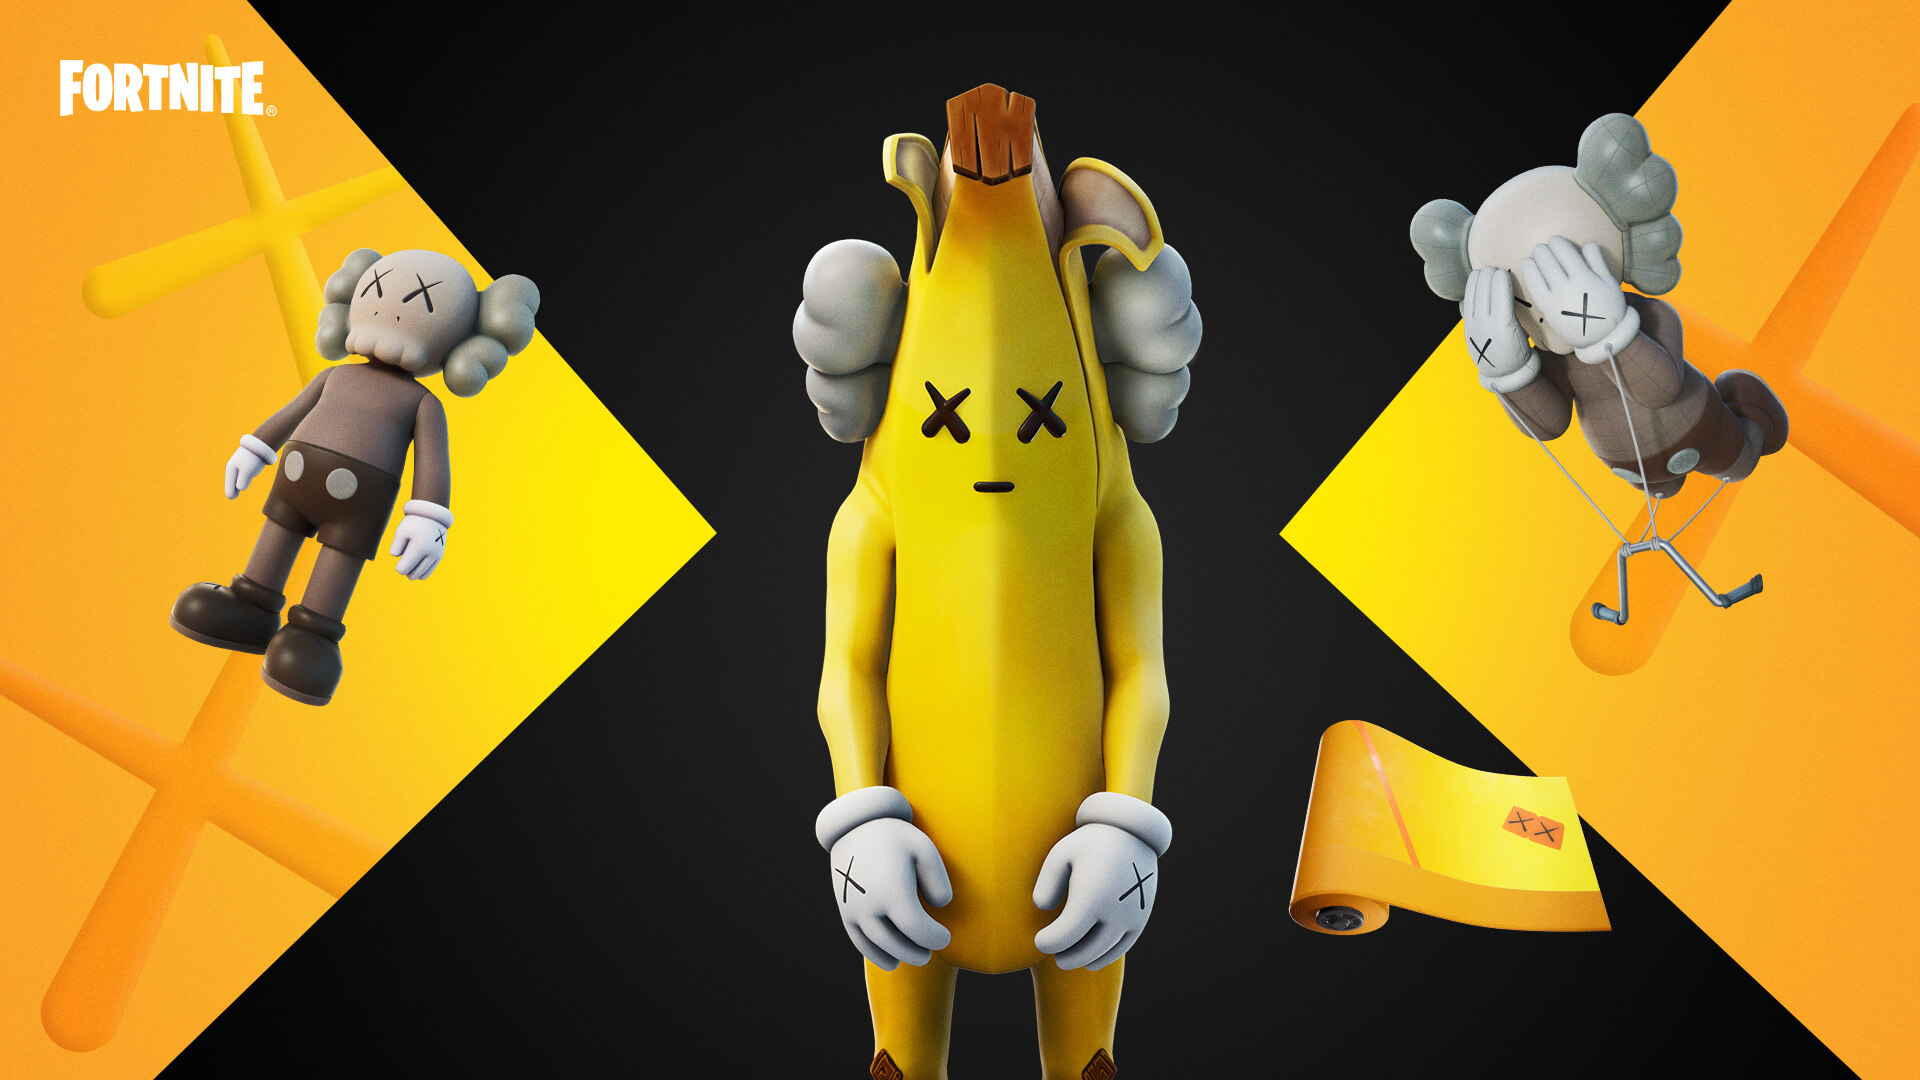 fortnite-kawspeely-outfit-default-kaws-companion-back-bling-far-from-home-glider-and-ripe-on-time-wrap-1920x1080-11c1eed0a759